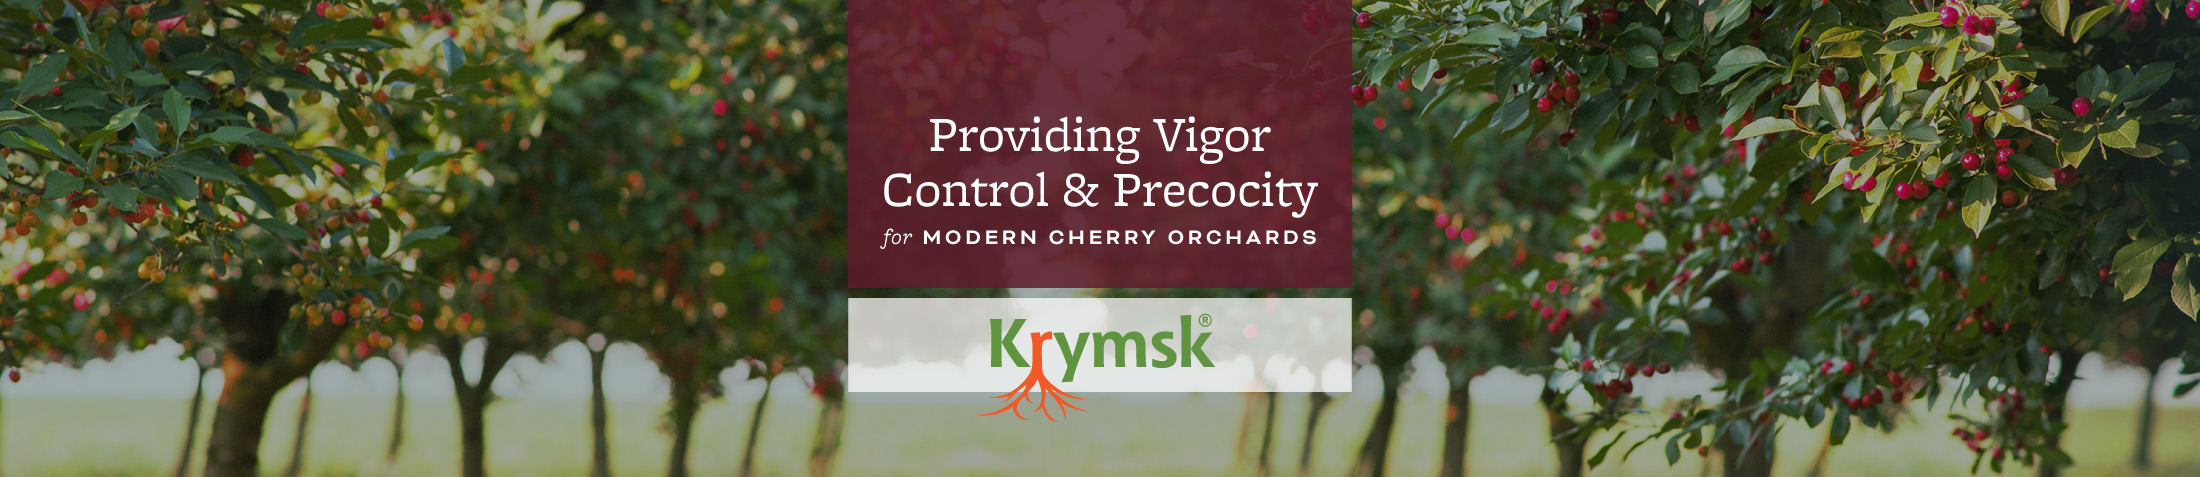 Krymsk Rootstock • Providing Vigor Control & Precocity for Modern Cherry Orchards